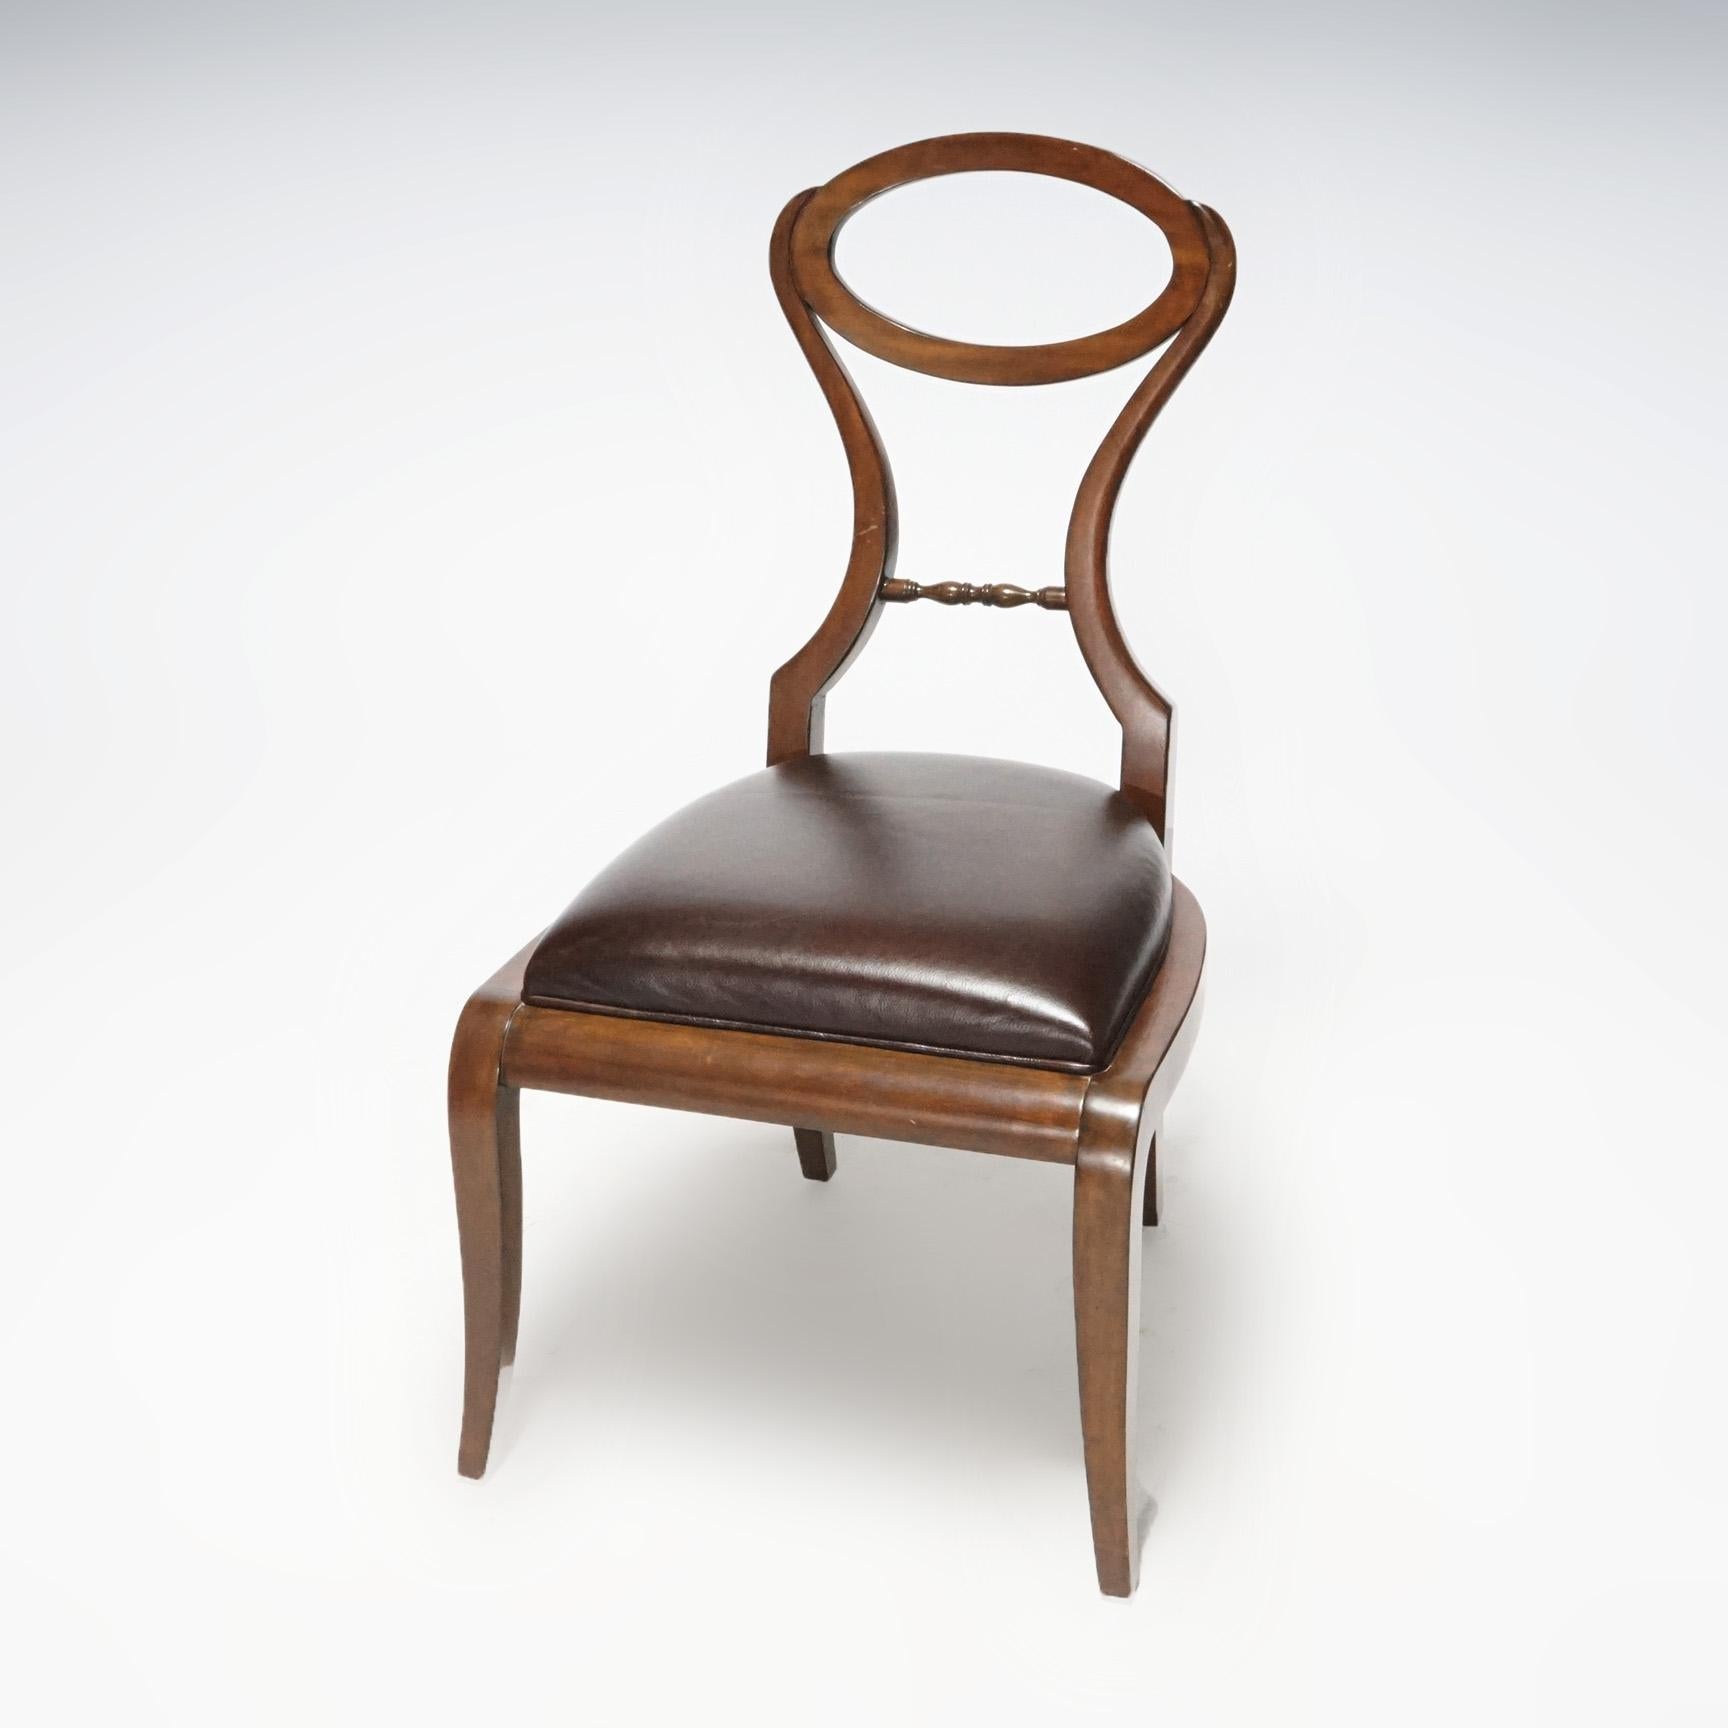 A French style side or vanity chair by Maitland Smith offers mahogany frame with stylized balloon back over upholstered seat, raised on splayed legs, maker label as photographed, 20th century.

Measures- 38.75''H x 21.25''W x 26''D.

Catalogue Note: